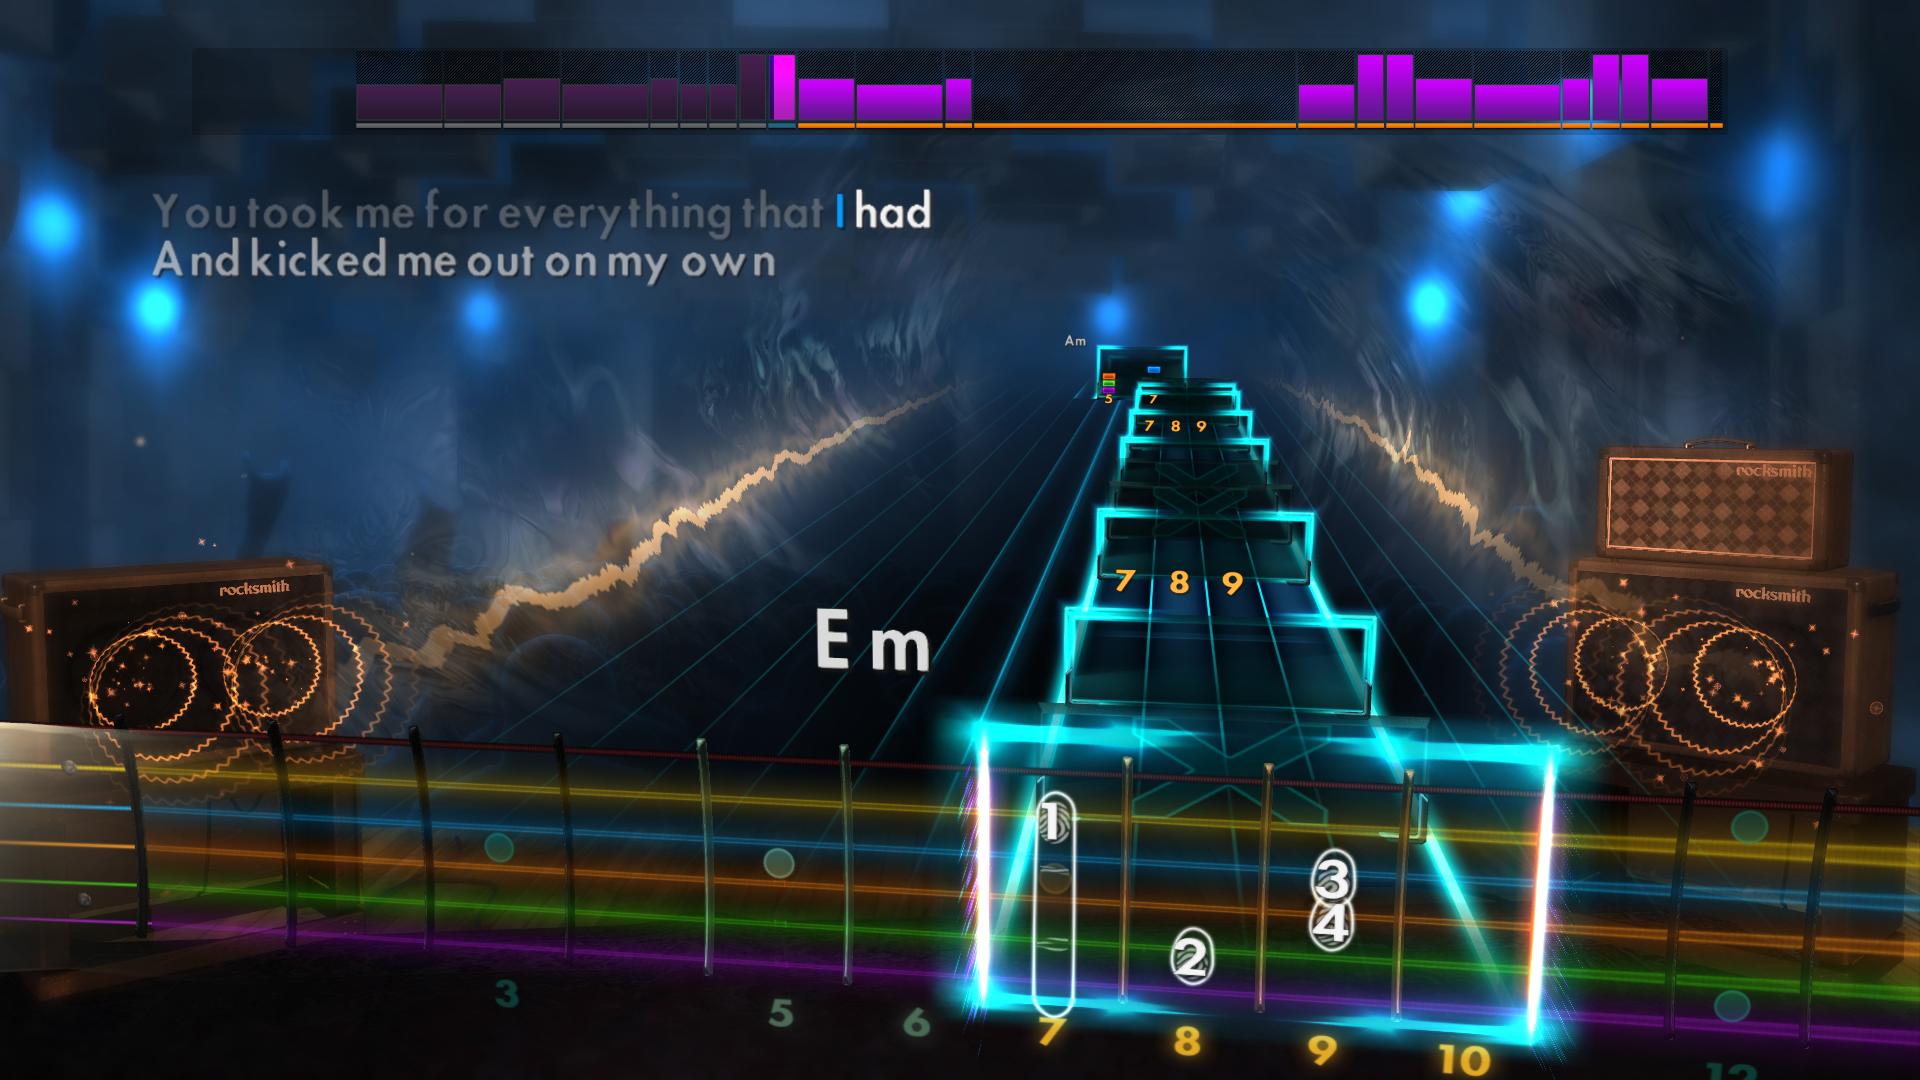 Rocksmith® 2014 – Queen - “Another One Bites the Dust” Featured Screenshot #1